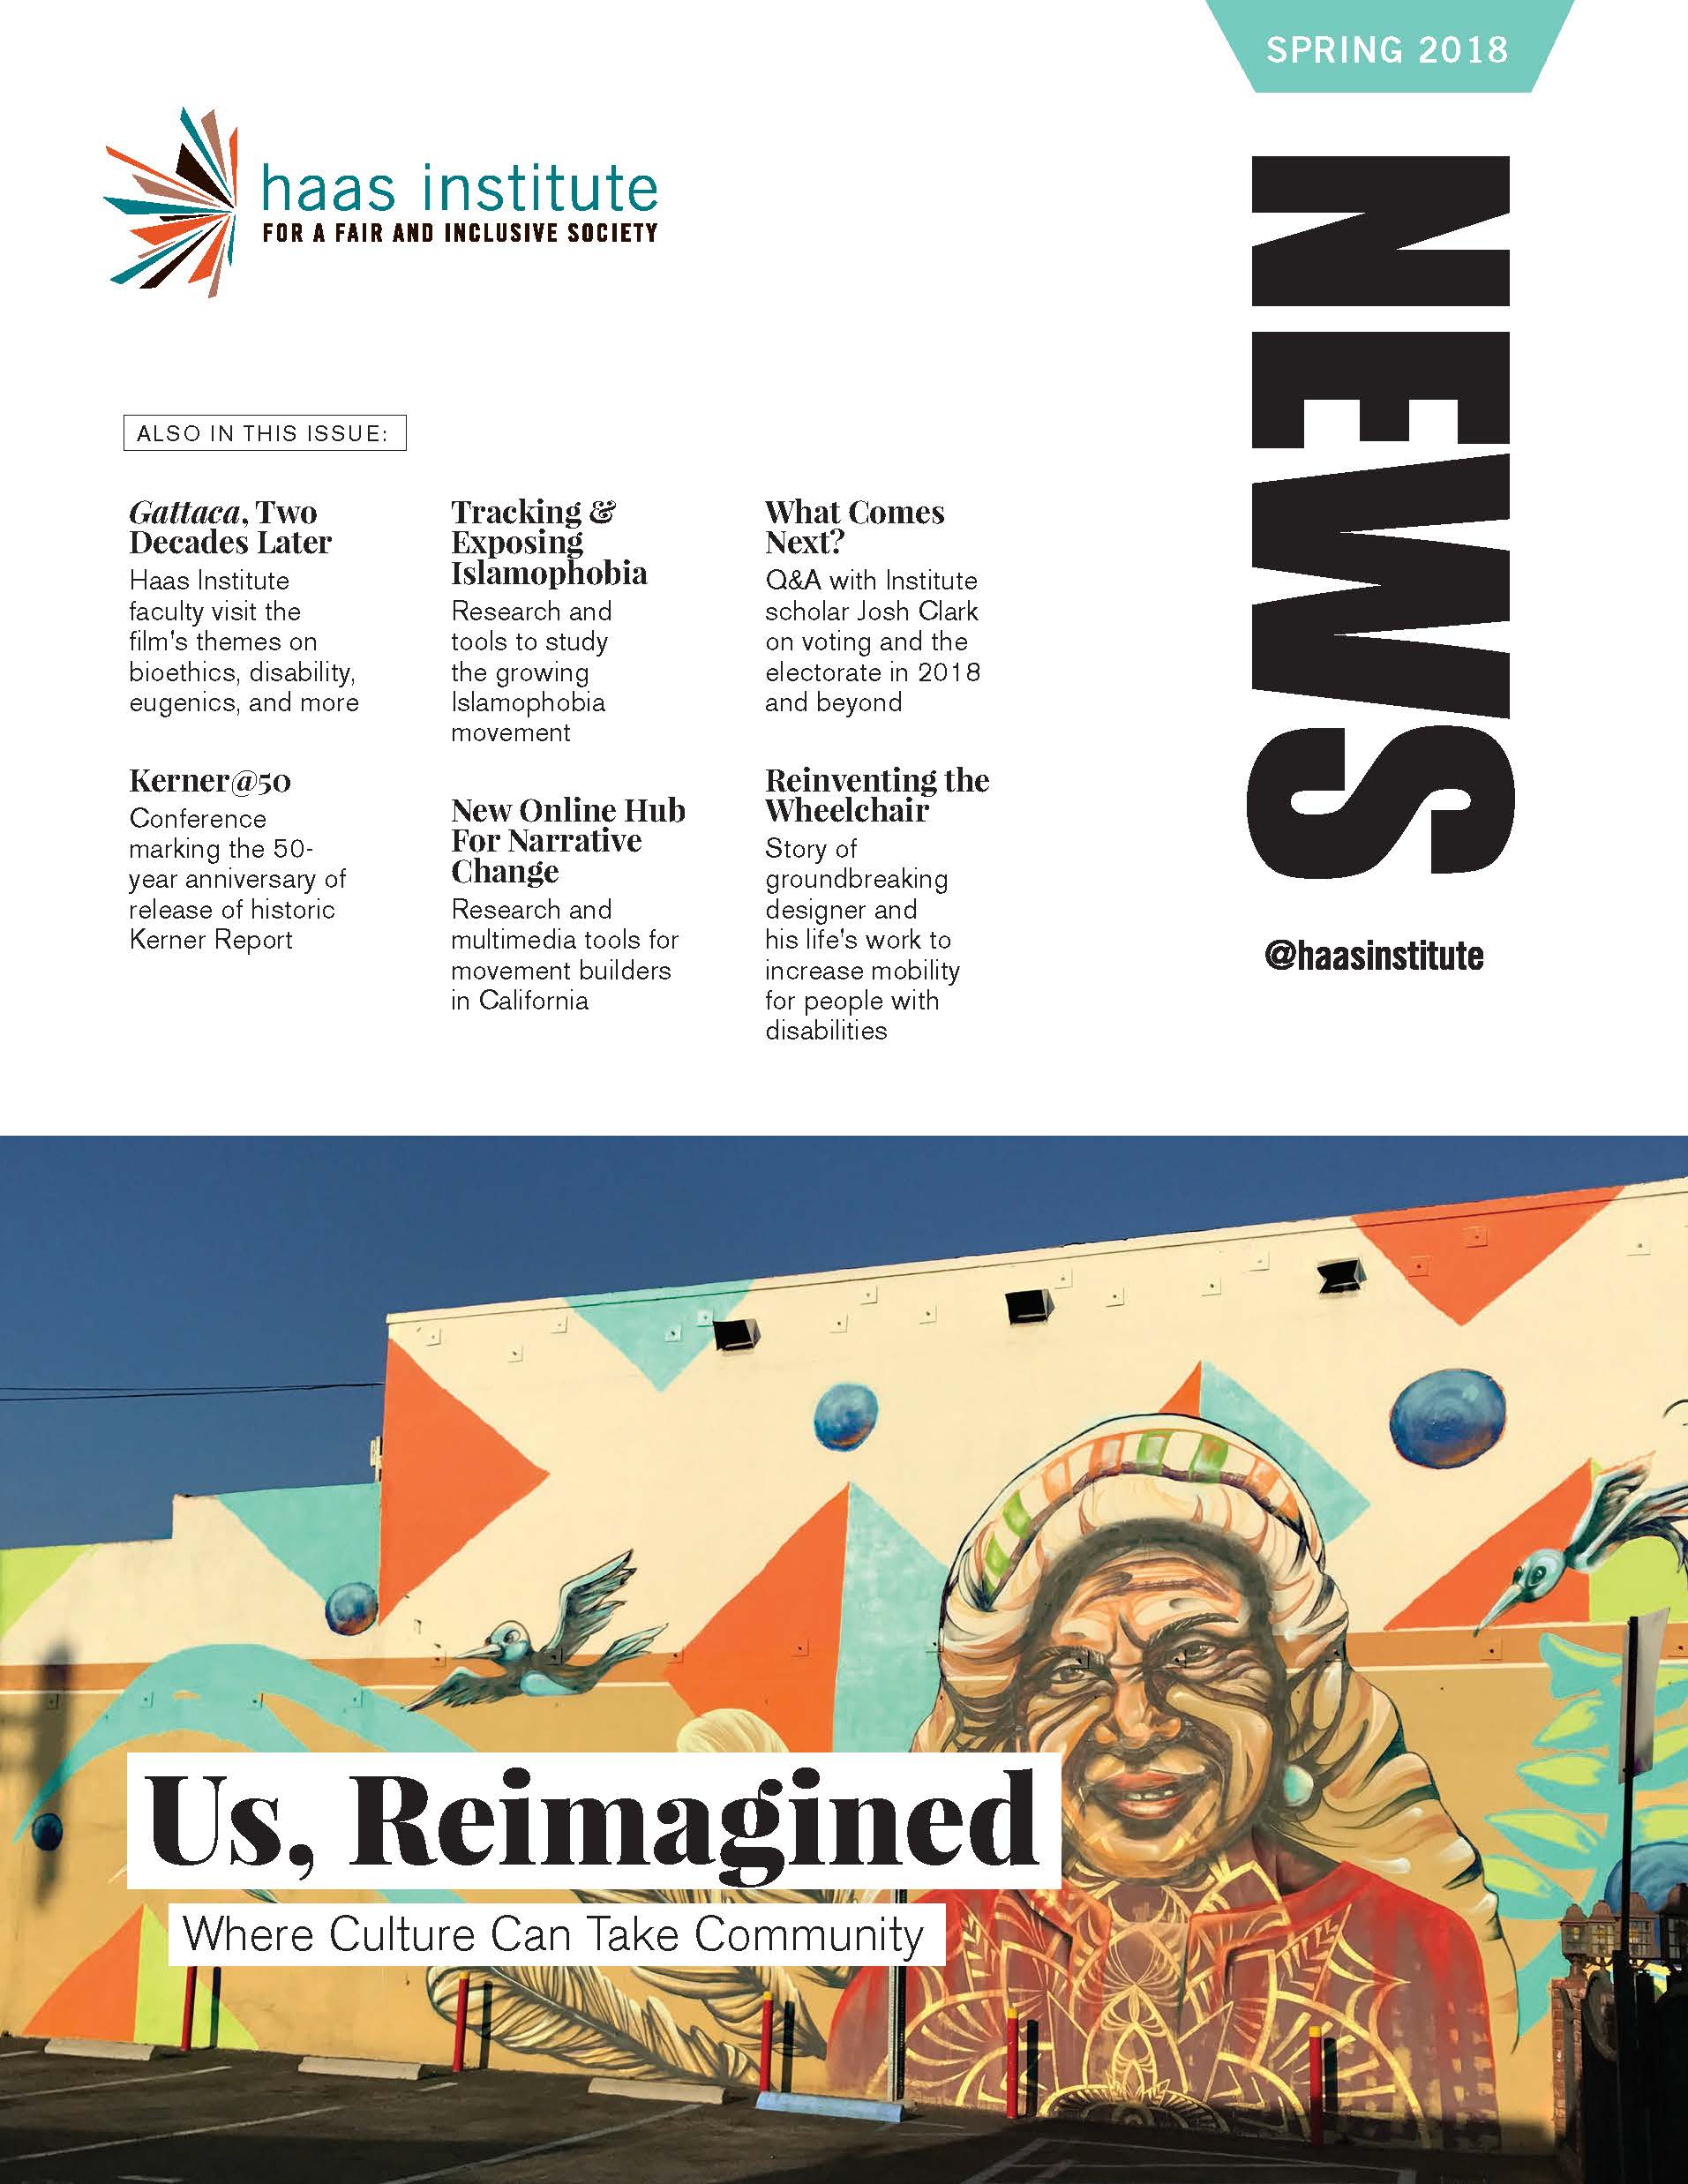 Cover of the Spring 2018 edition of the Haas Institute news magazine